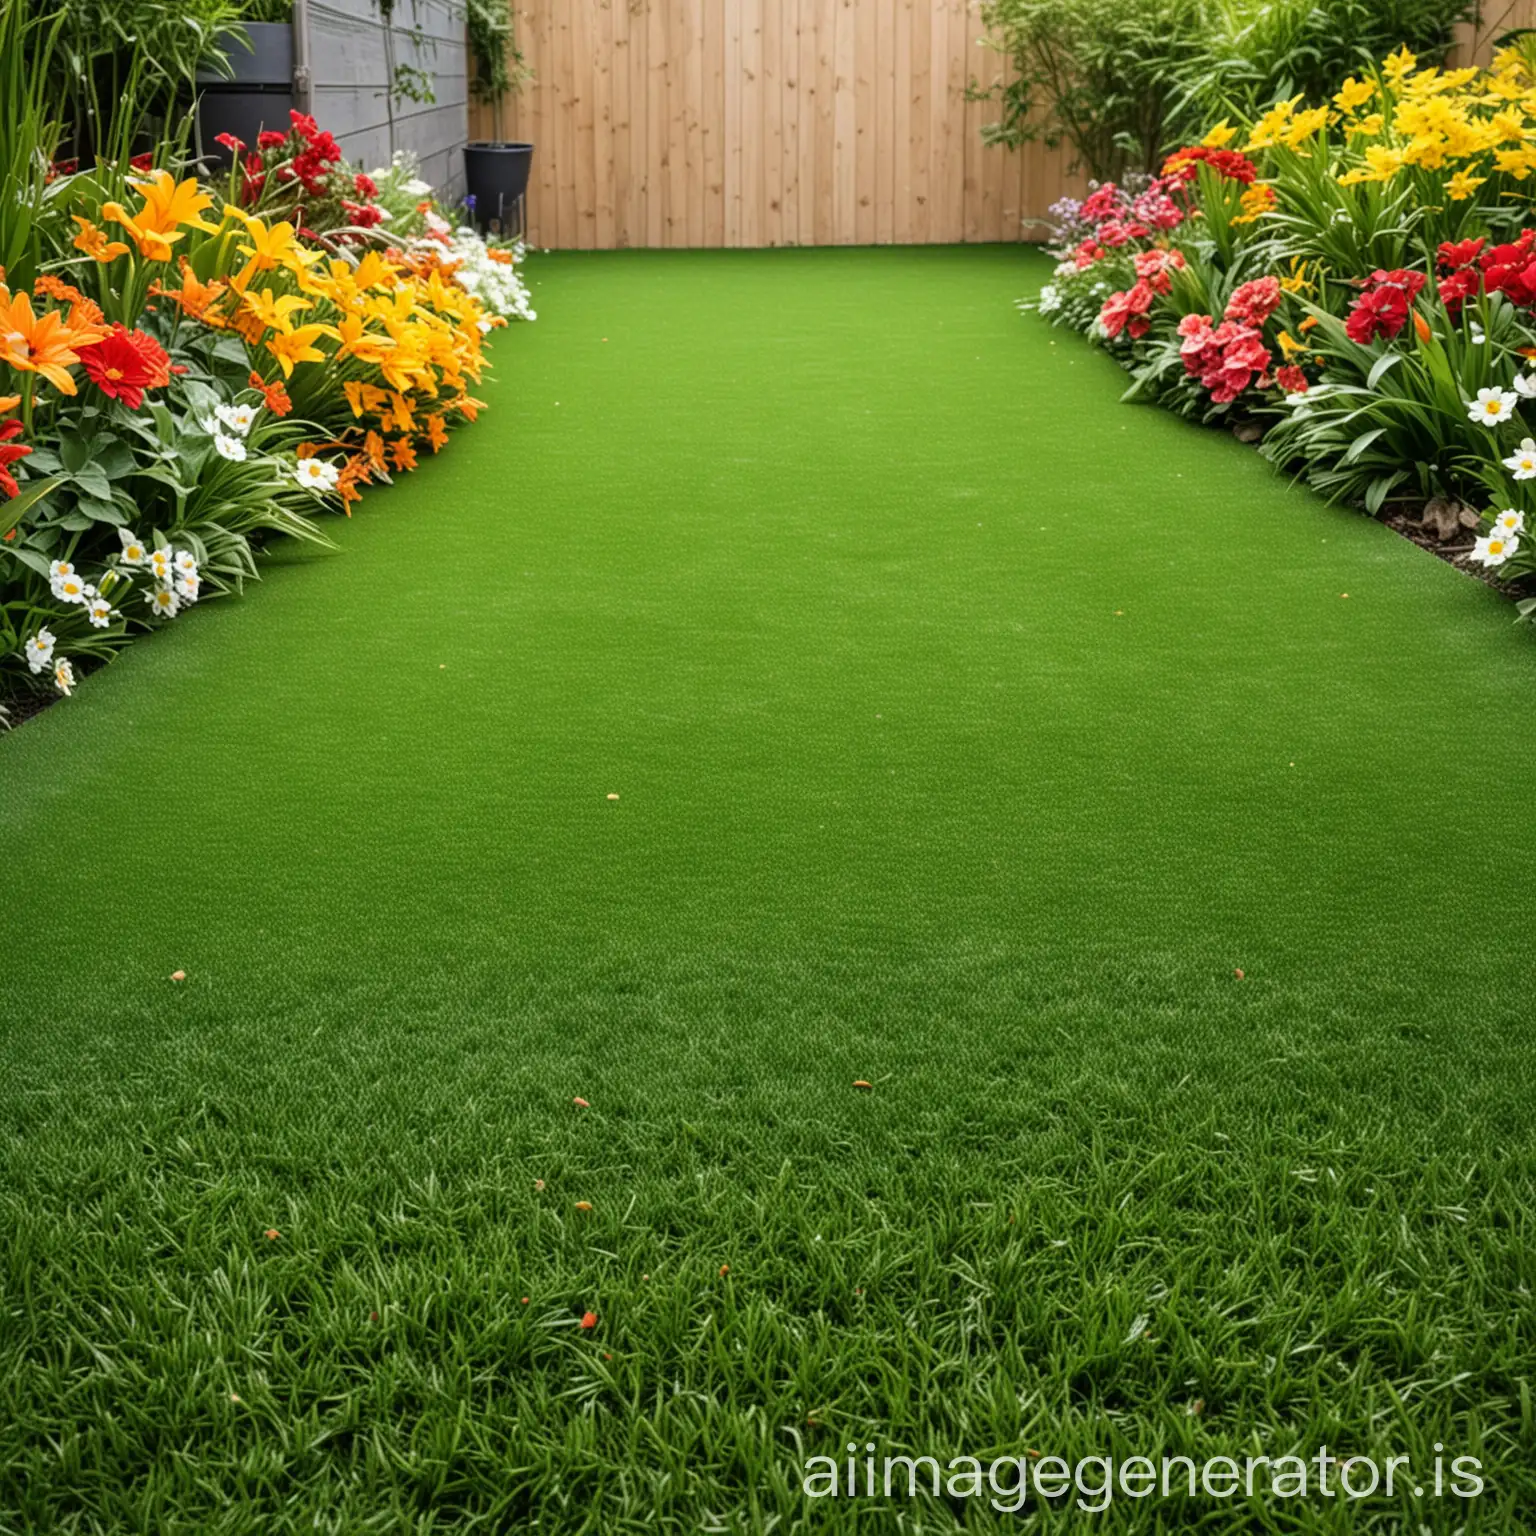 home with  artificial grass and some a tiny amount of flowers in the backyard  Copy space image Place a significant amount of space for adding text or design